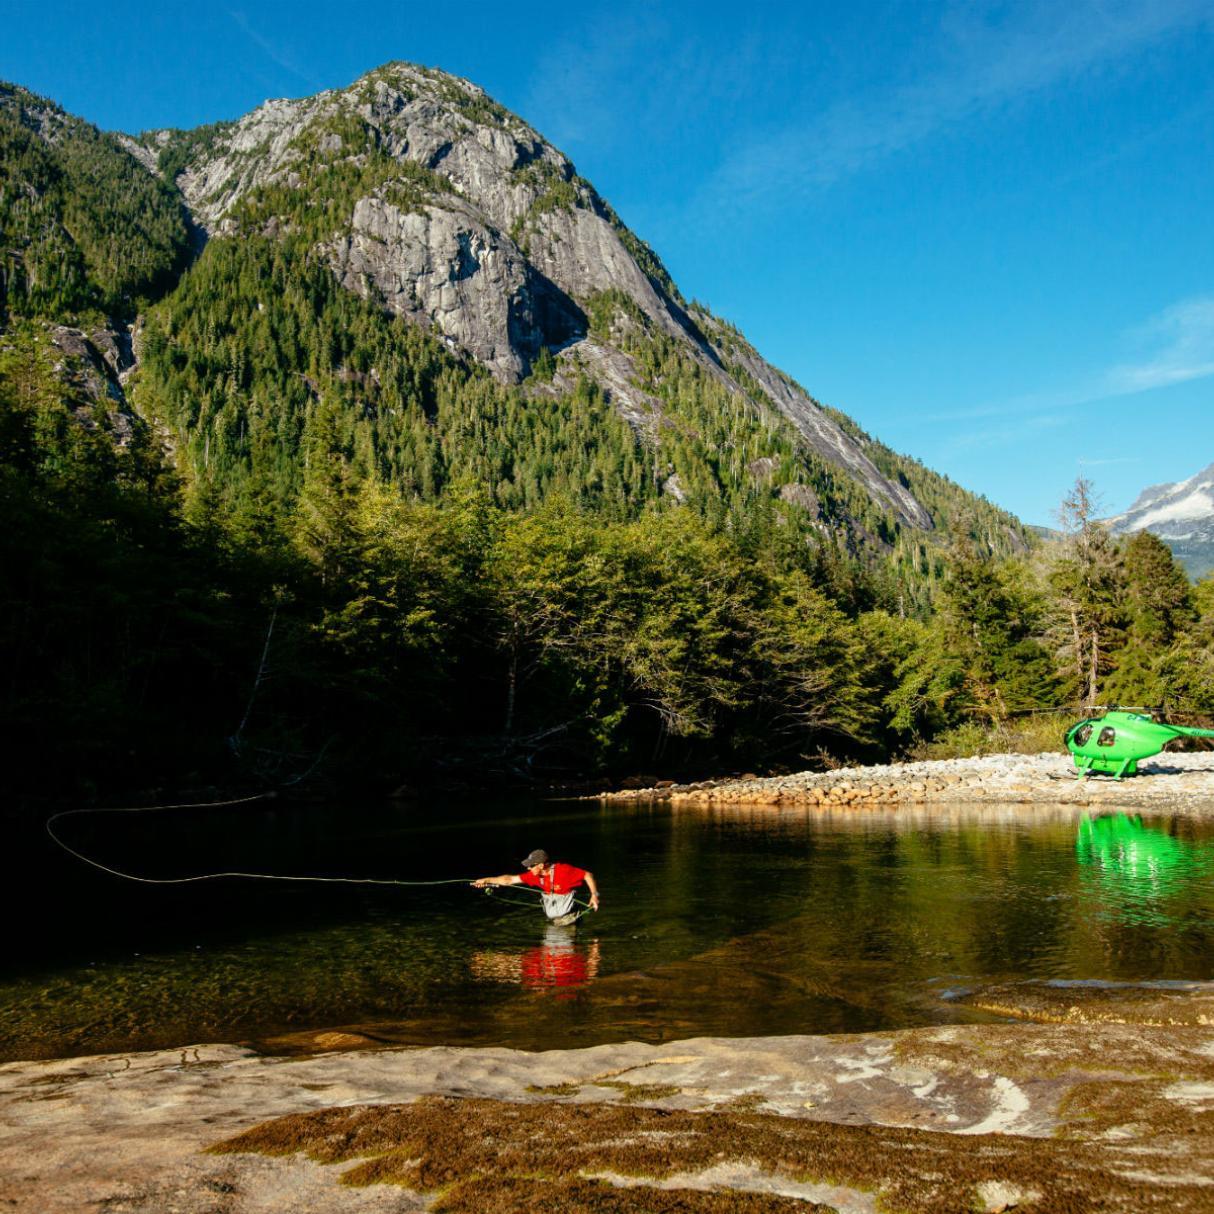 A person stands waist deep and casts a fishing line. In the background sits a green helicopter on the shore accompanied by mountains and forest.